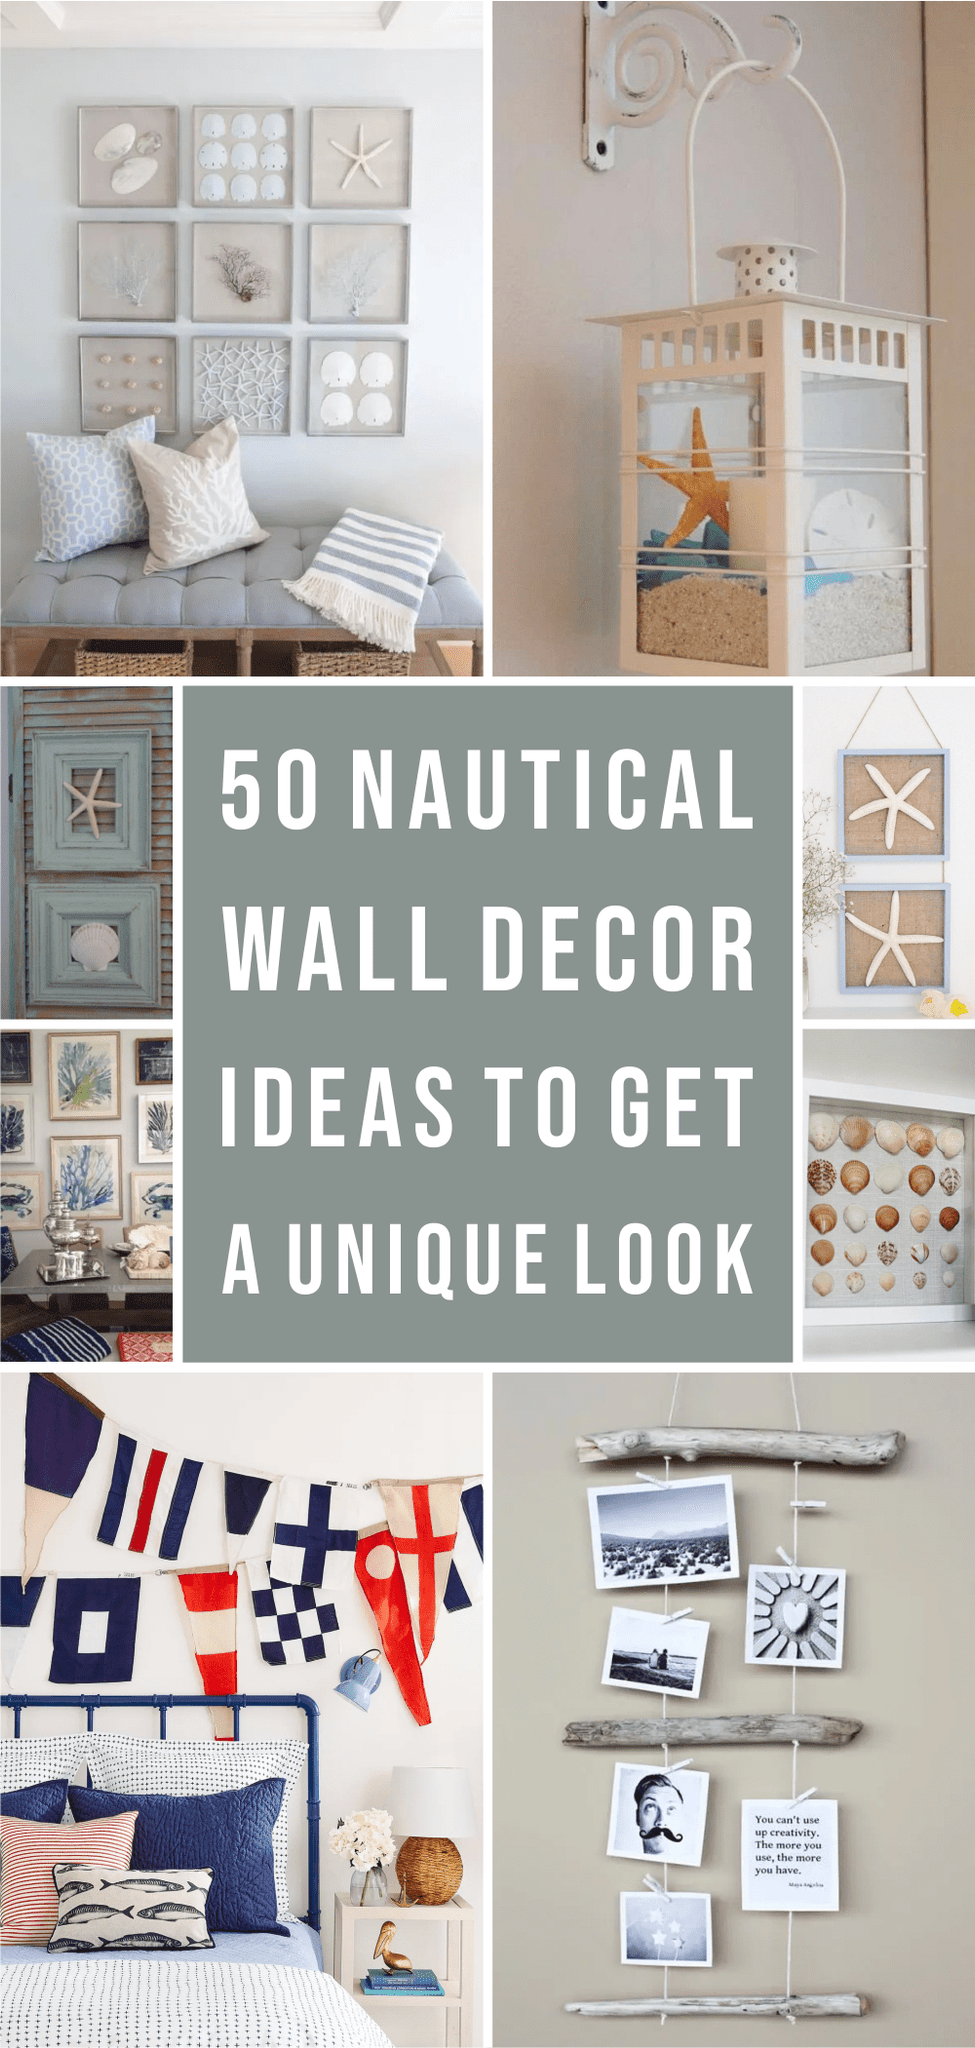 50 Nautical Wall Decor Ideas to Get a Unique Look